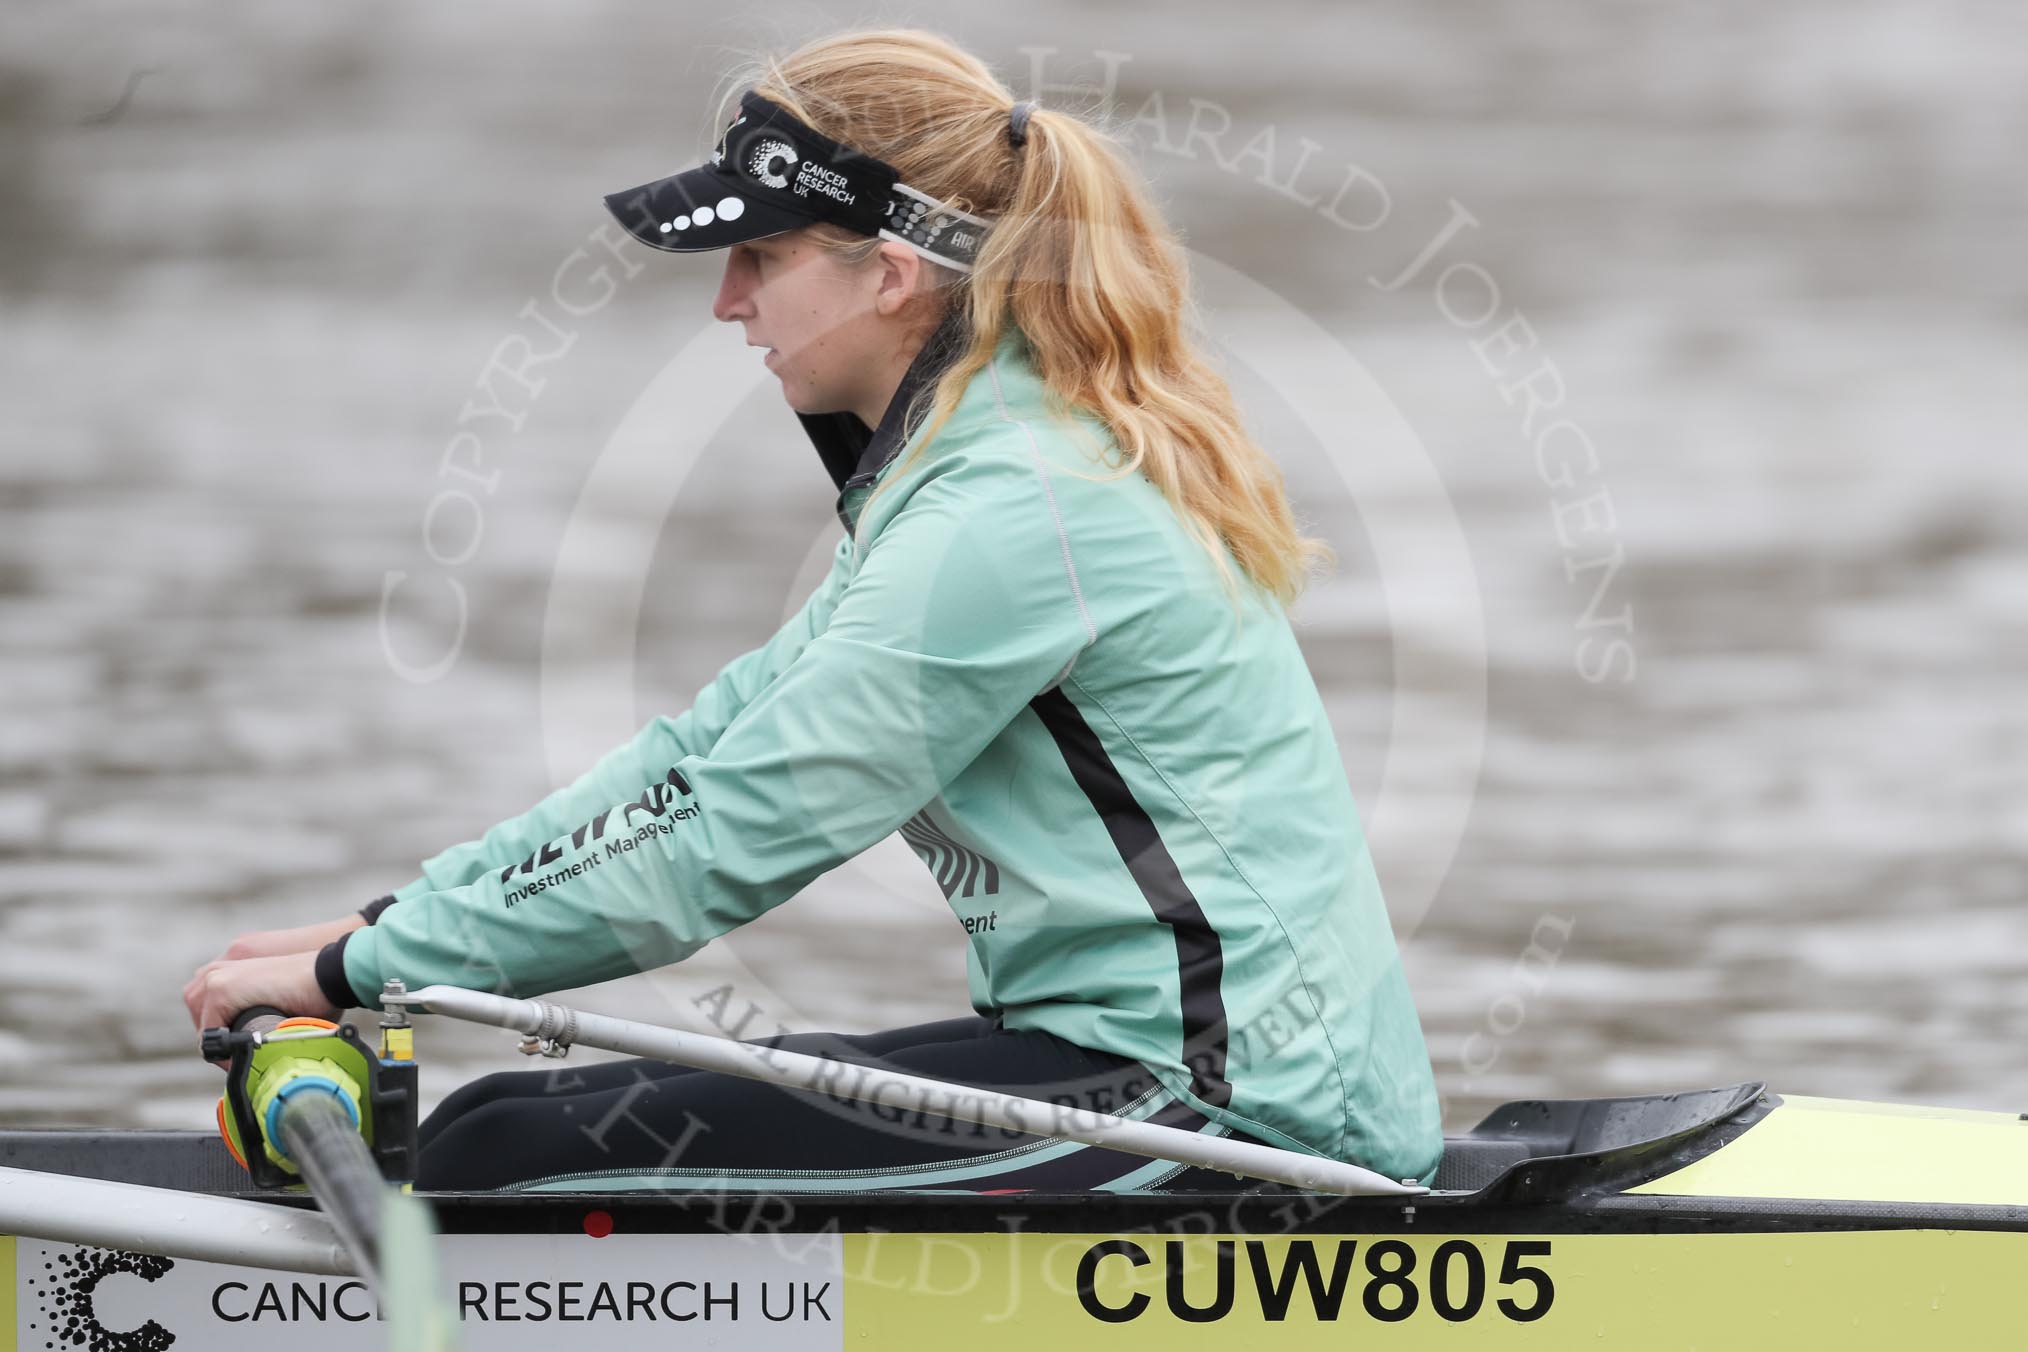 The Boat Race season 2018 - Women's Boat Race Trial Eights (CUWBC, Cambridge): Lucy Pike (bow) in Wingardium Leviosa.
River Thames between Putney Bridge and Mortlake,
London SW15,

United Kingdom,
on 05 December 2017 at 12:03, image #13